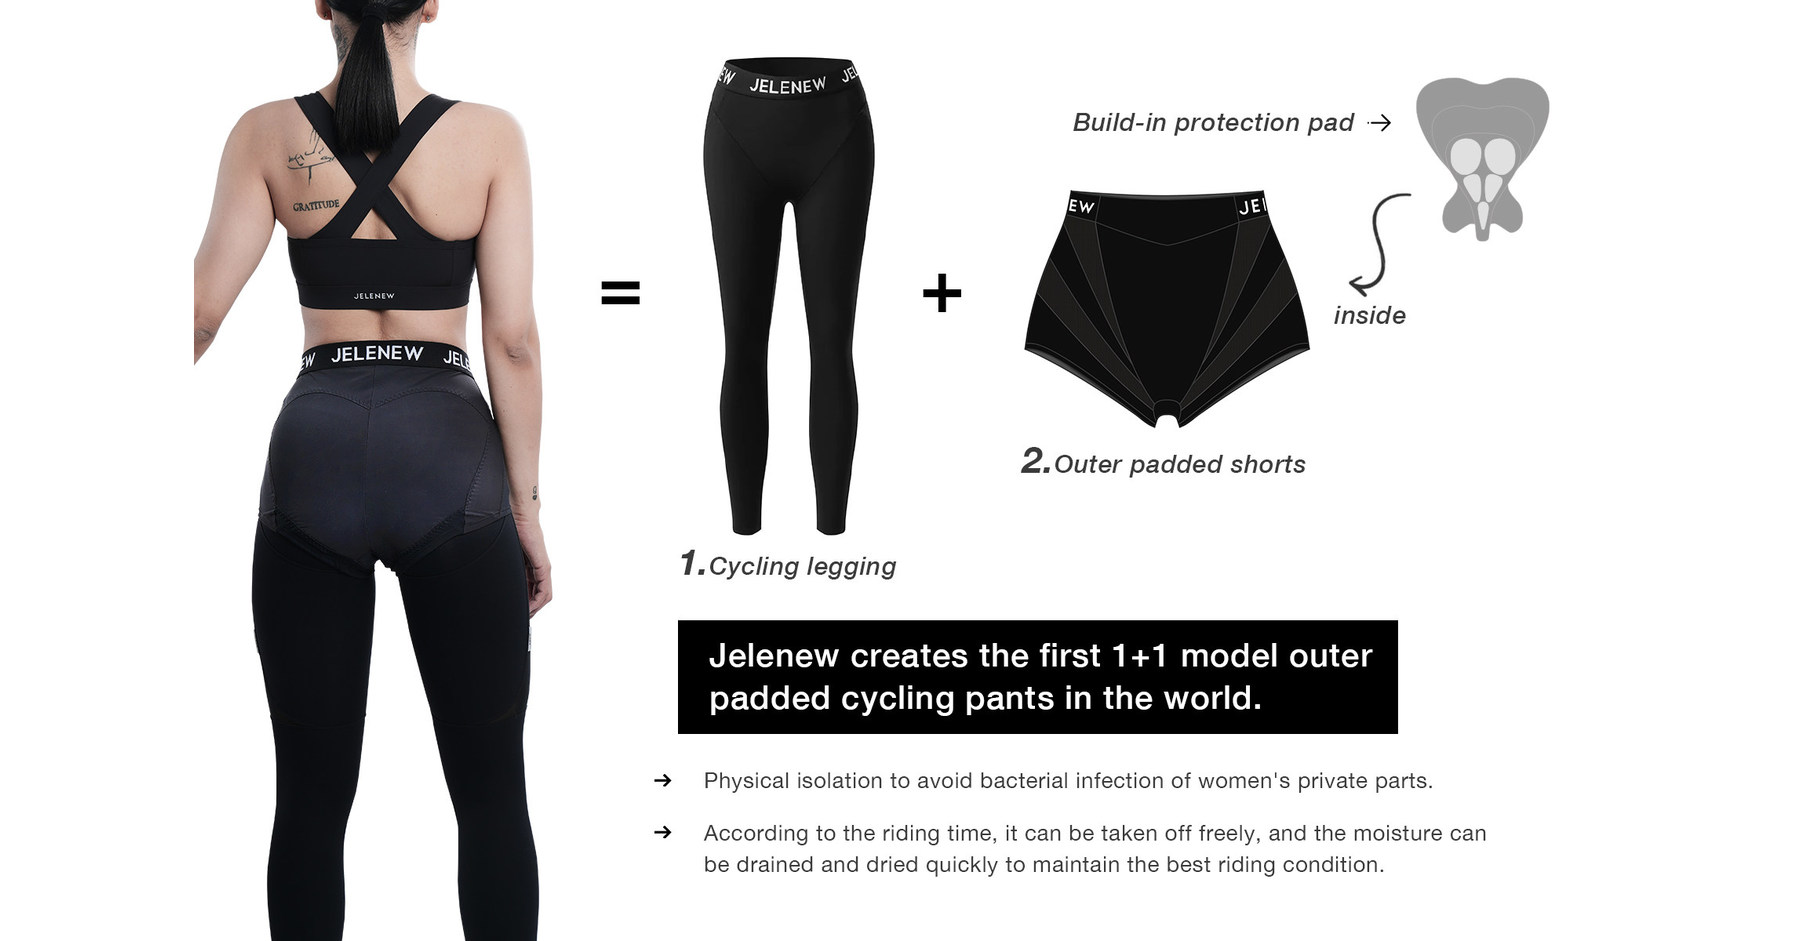 Jelenew：The first cycling brand who creates the first 1+1 model